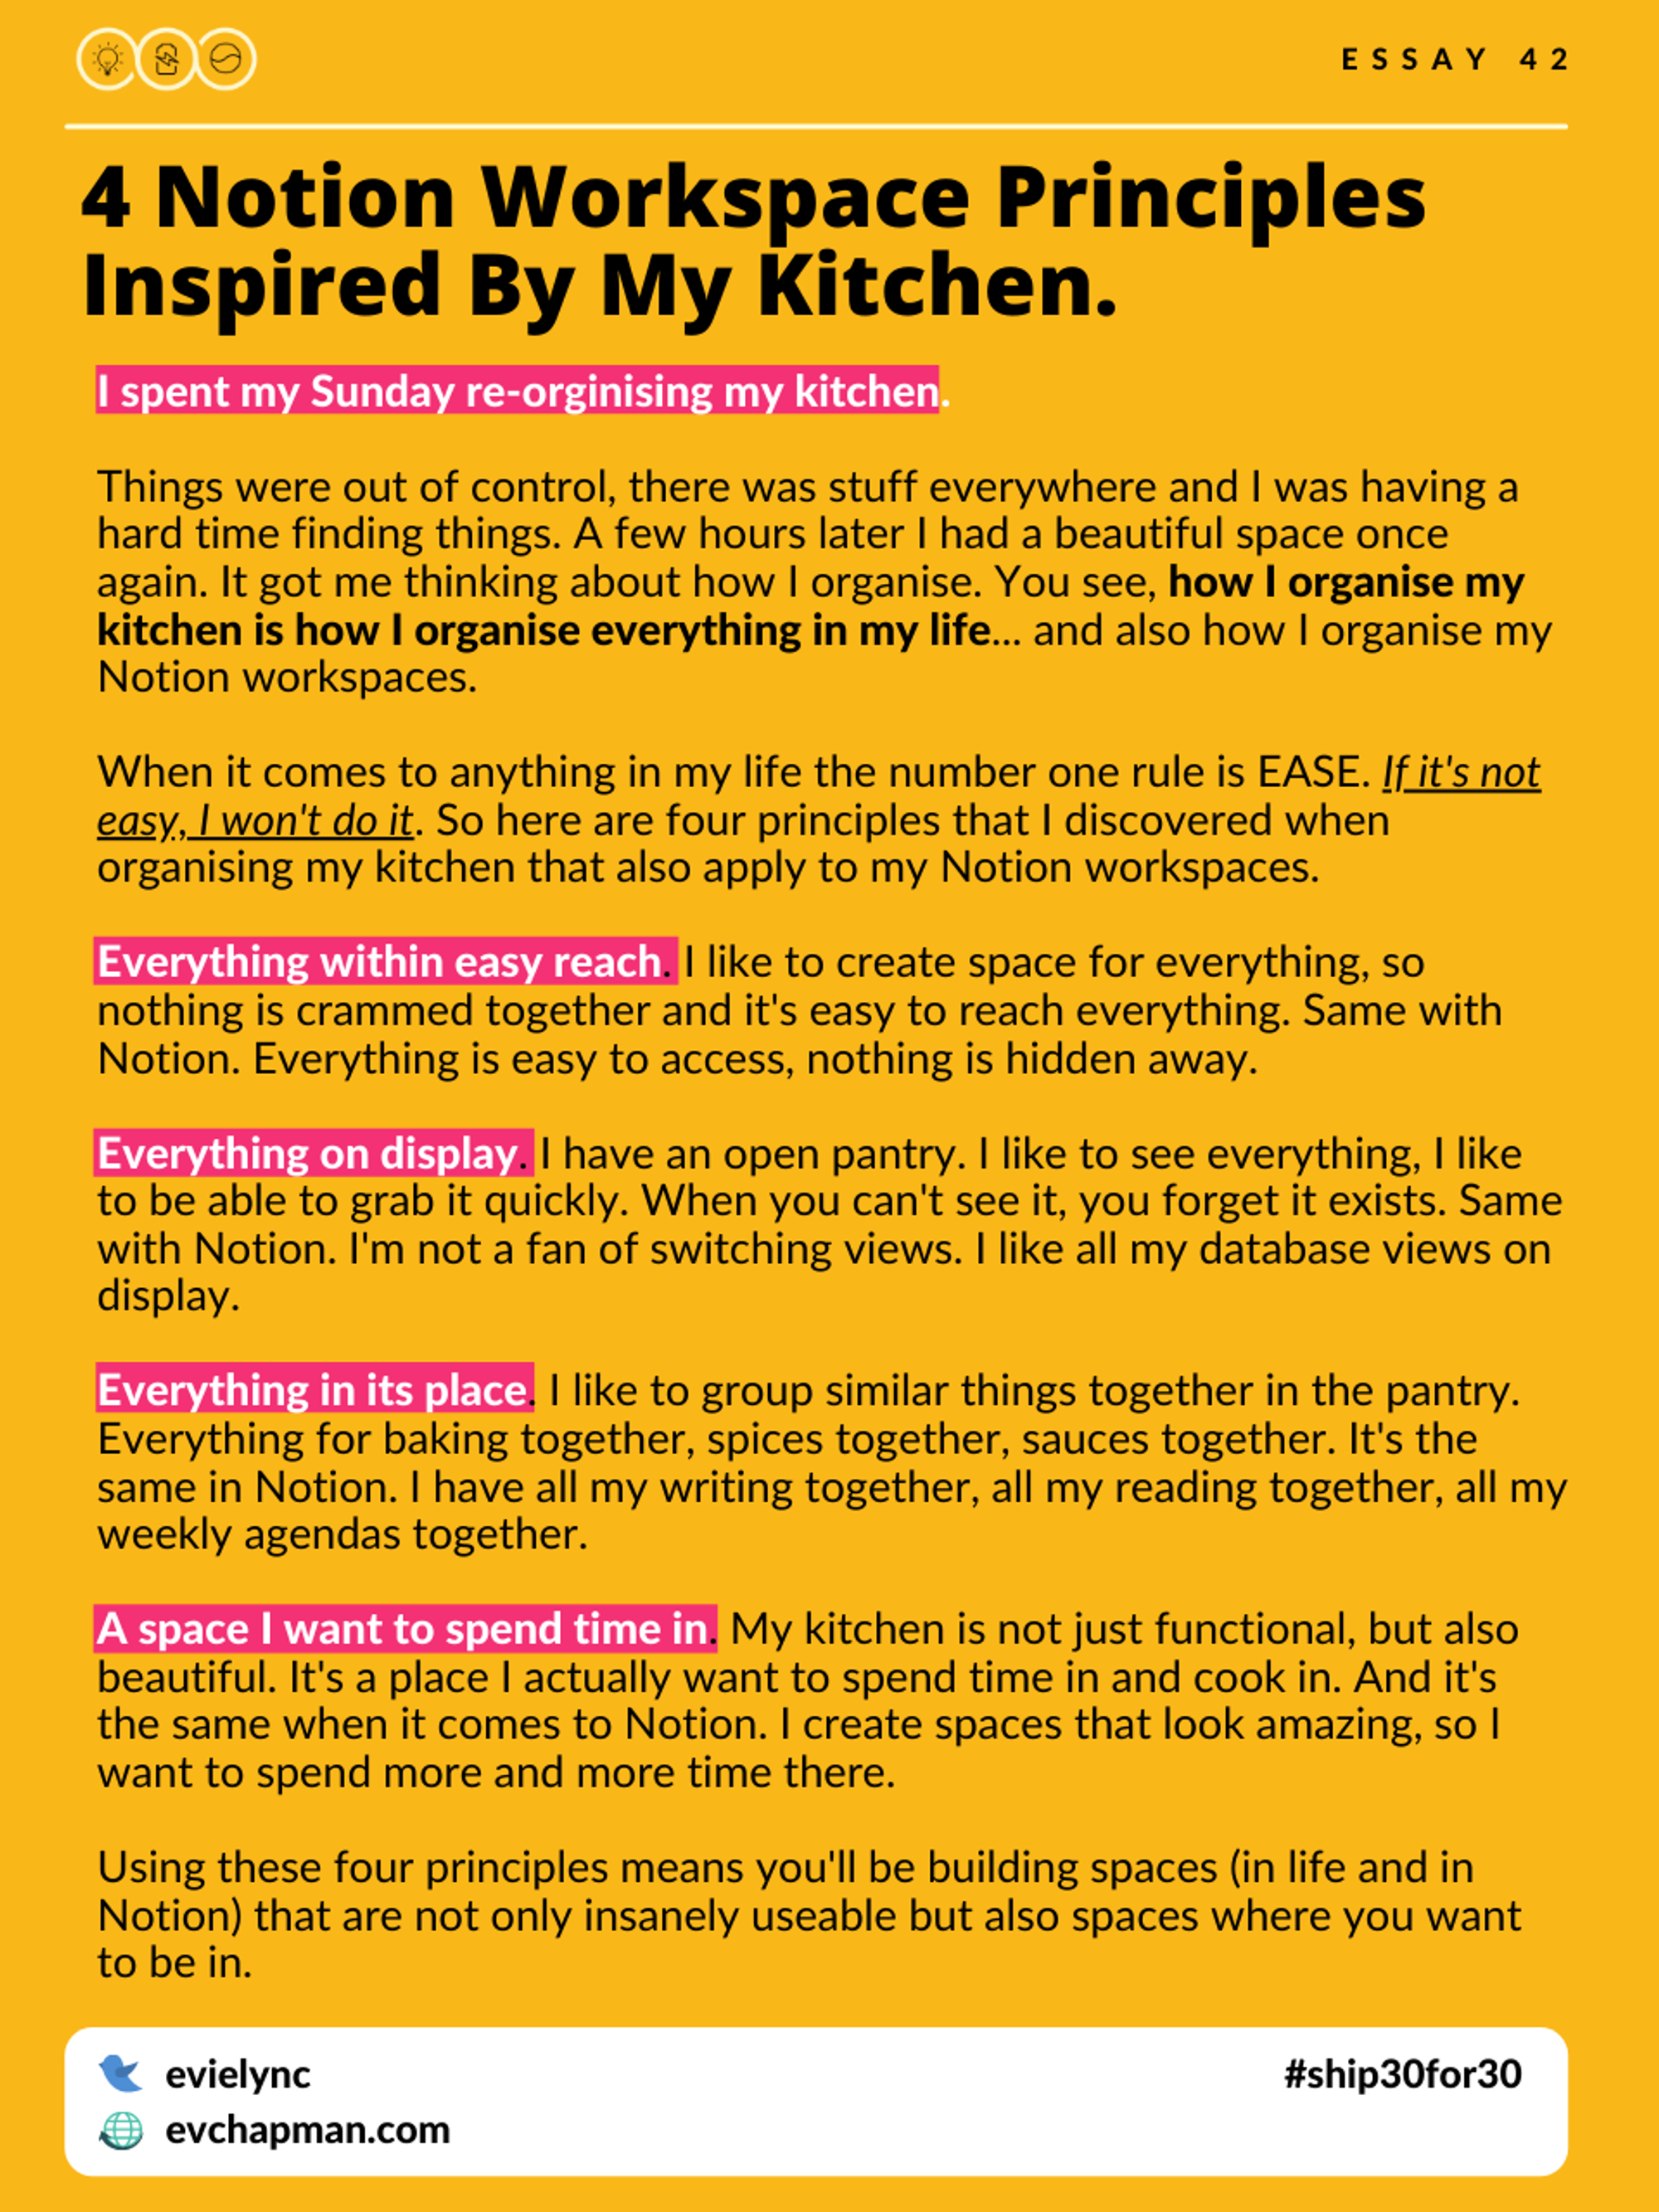 4 Notion Workspace Principles Inspired By My Kitchen